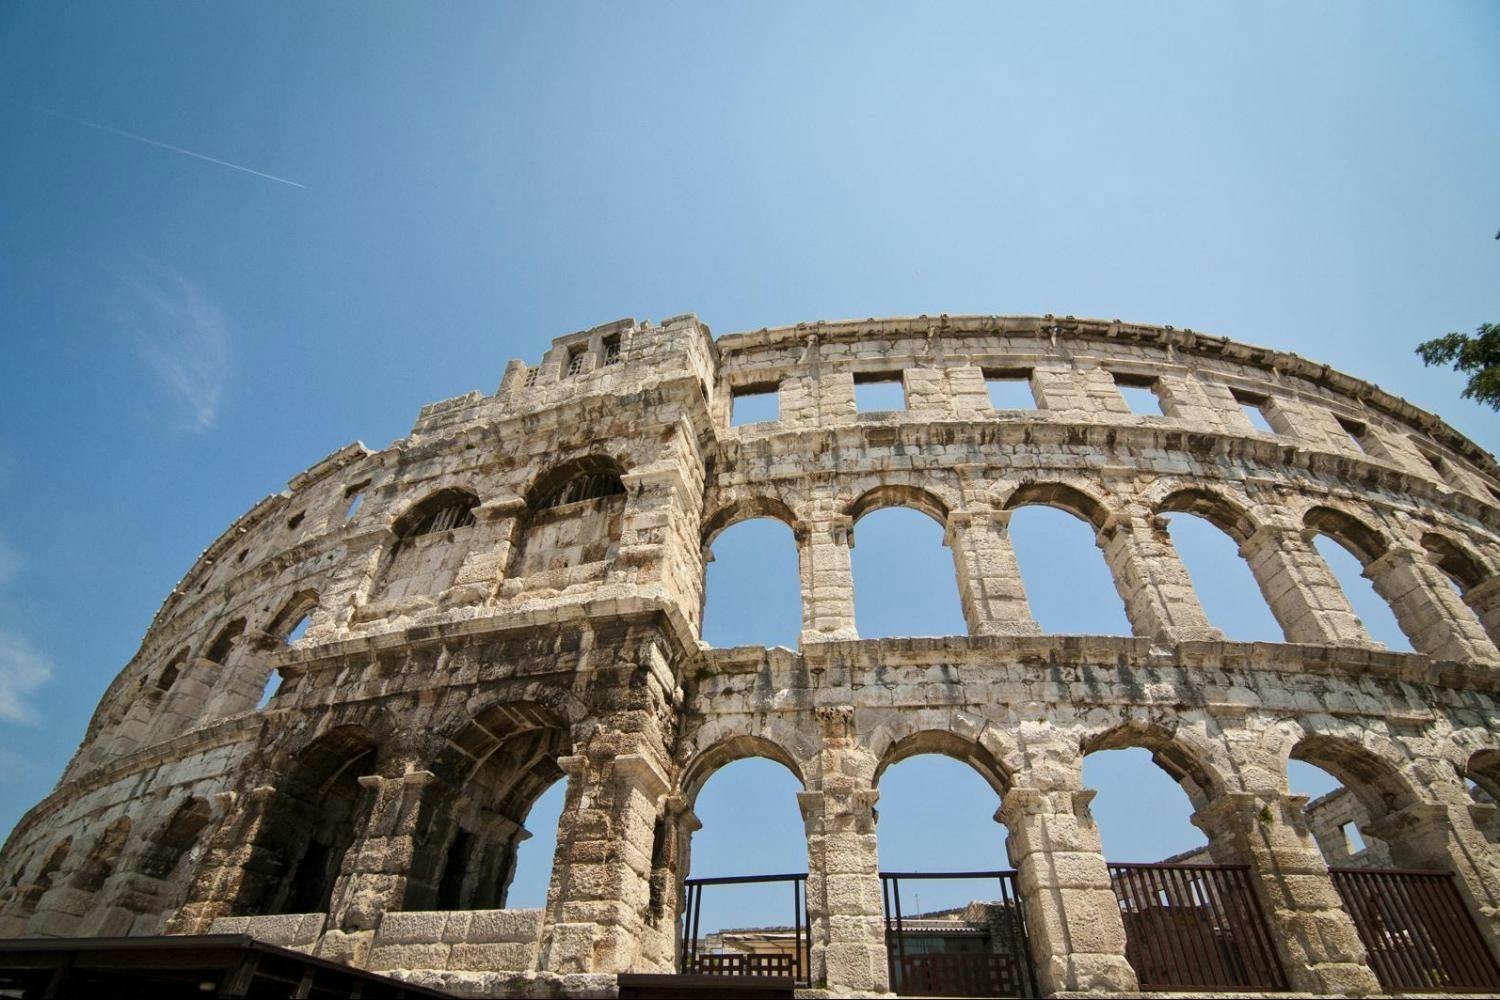 Colosseum walking tour with Roman Forum and Palatine Hill